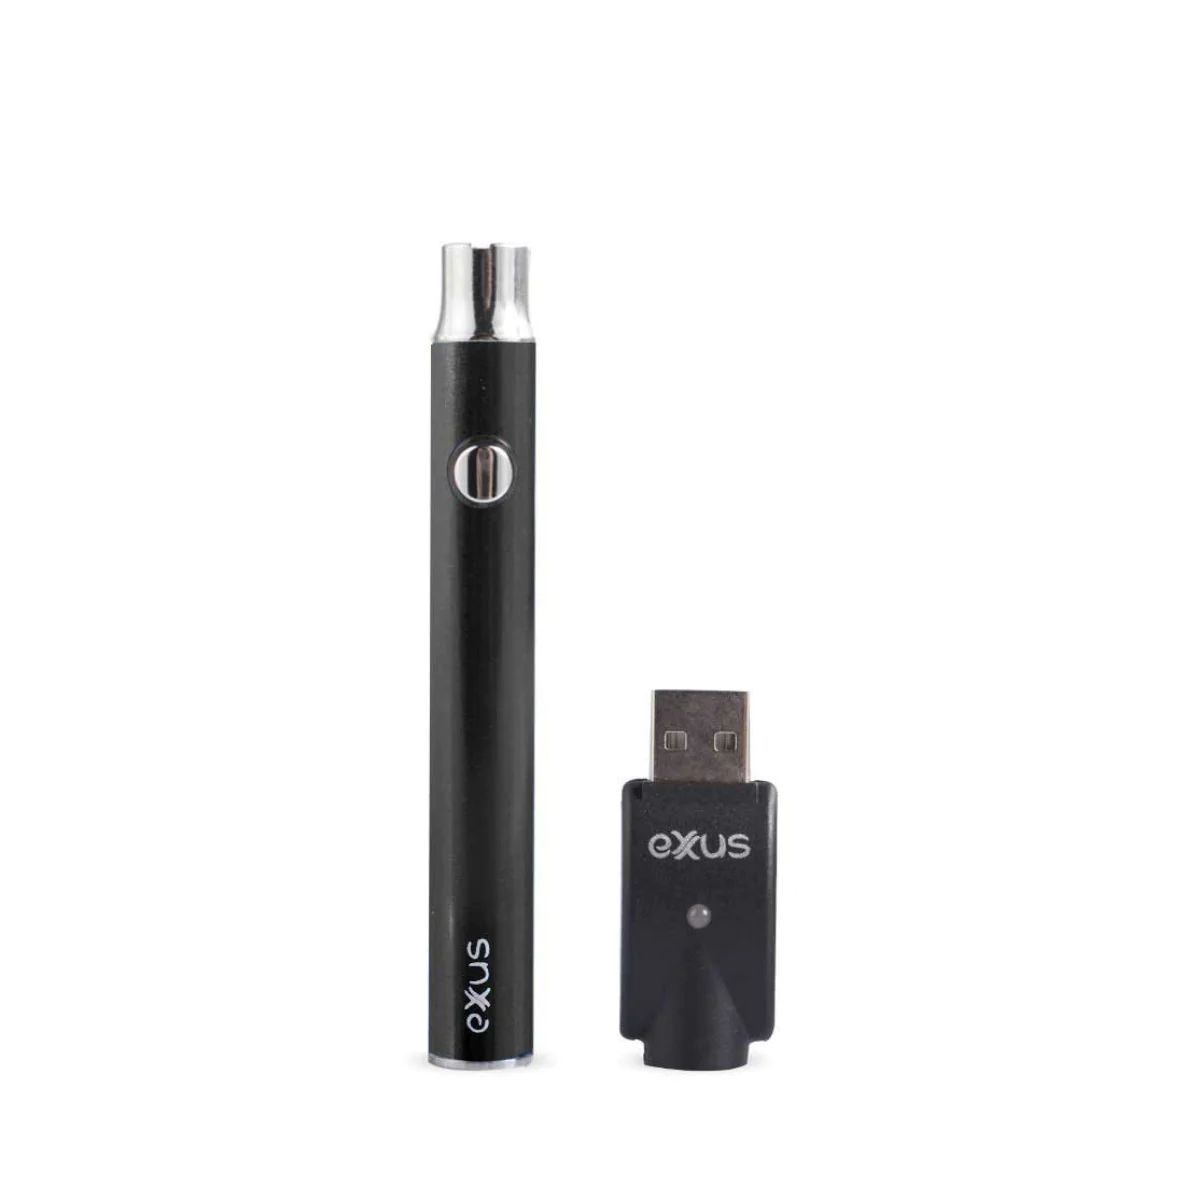 Cartridge Vaporizers By One Stoppipe Shop-Comprehensive Evaluation Top Cartridge Vaporizers Unveiled